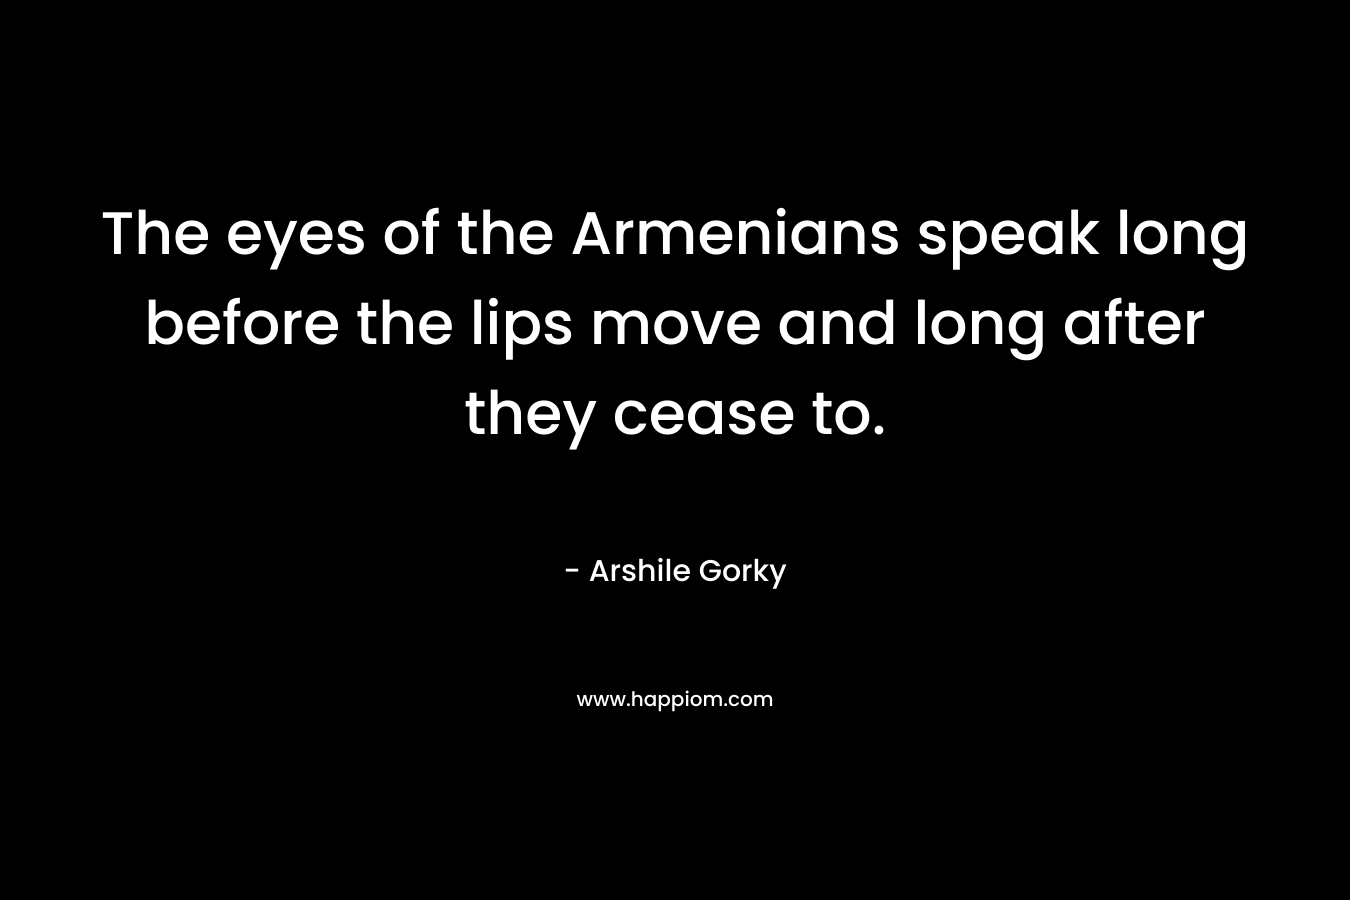 The eyes of the Armenians speak long before the lips move and long after they cease to.